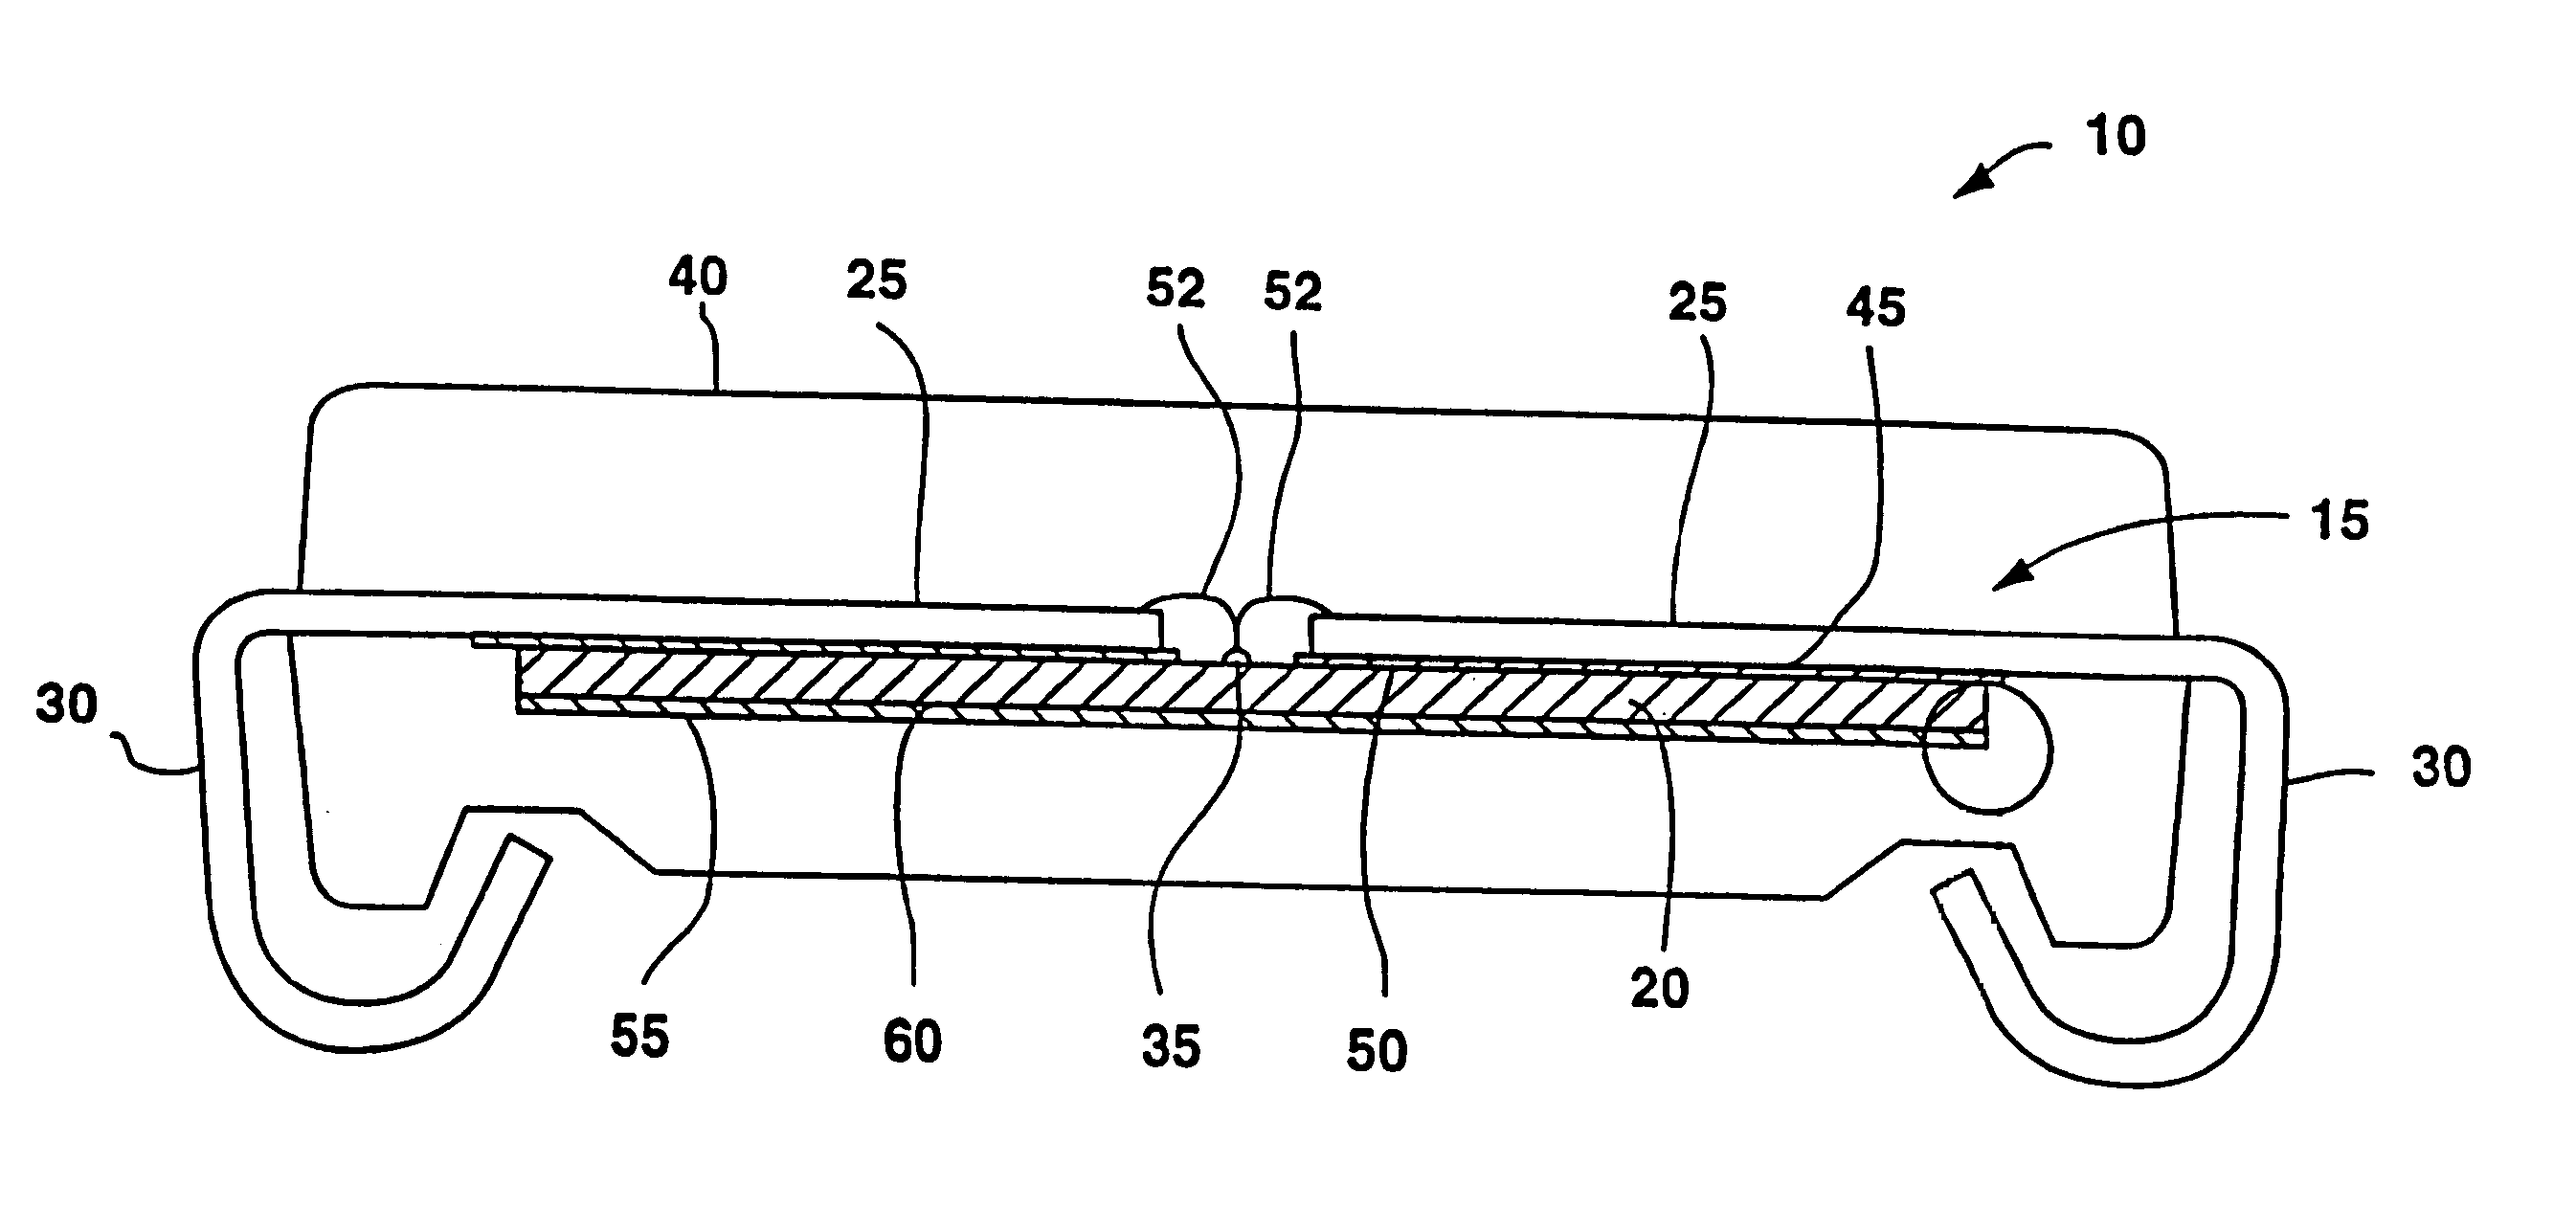 Semiconductor device structure with adhesion-enhanced semiconductor die